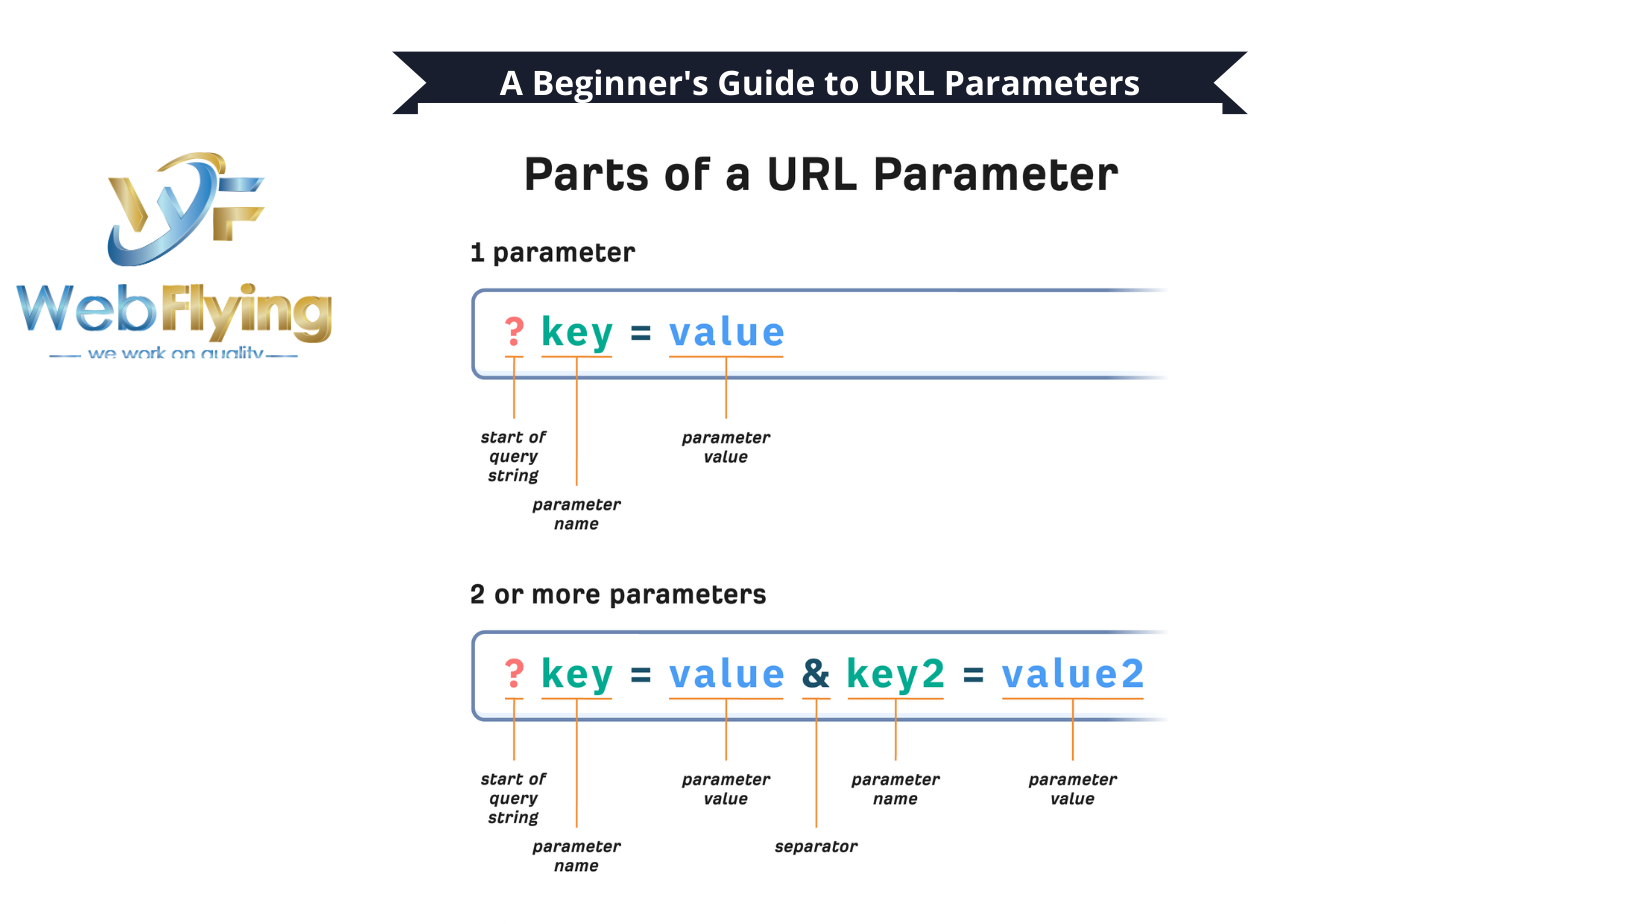 A Beginner's Guide to URL Parameters